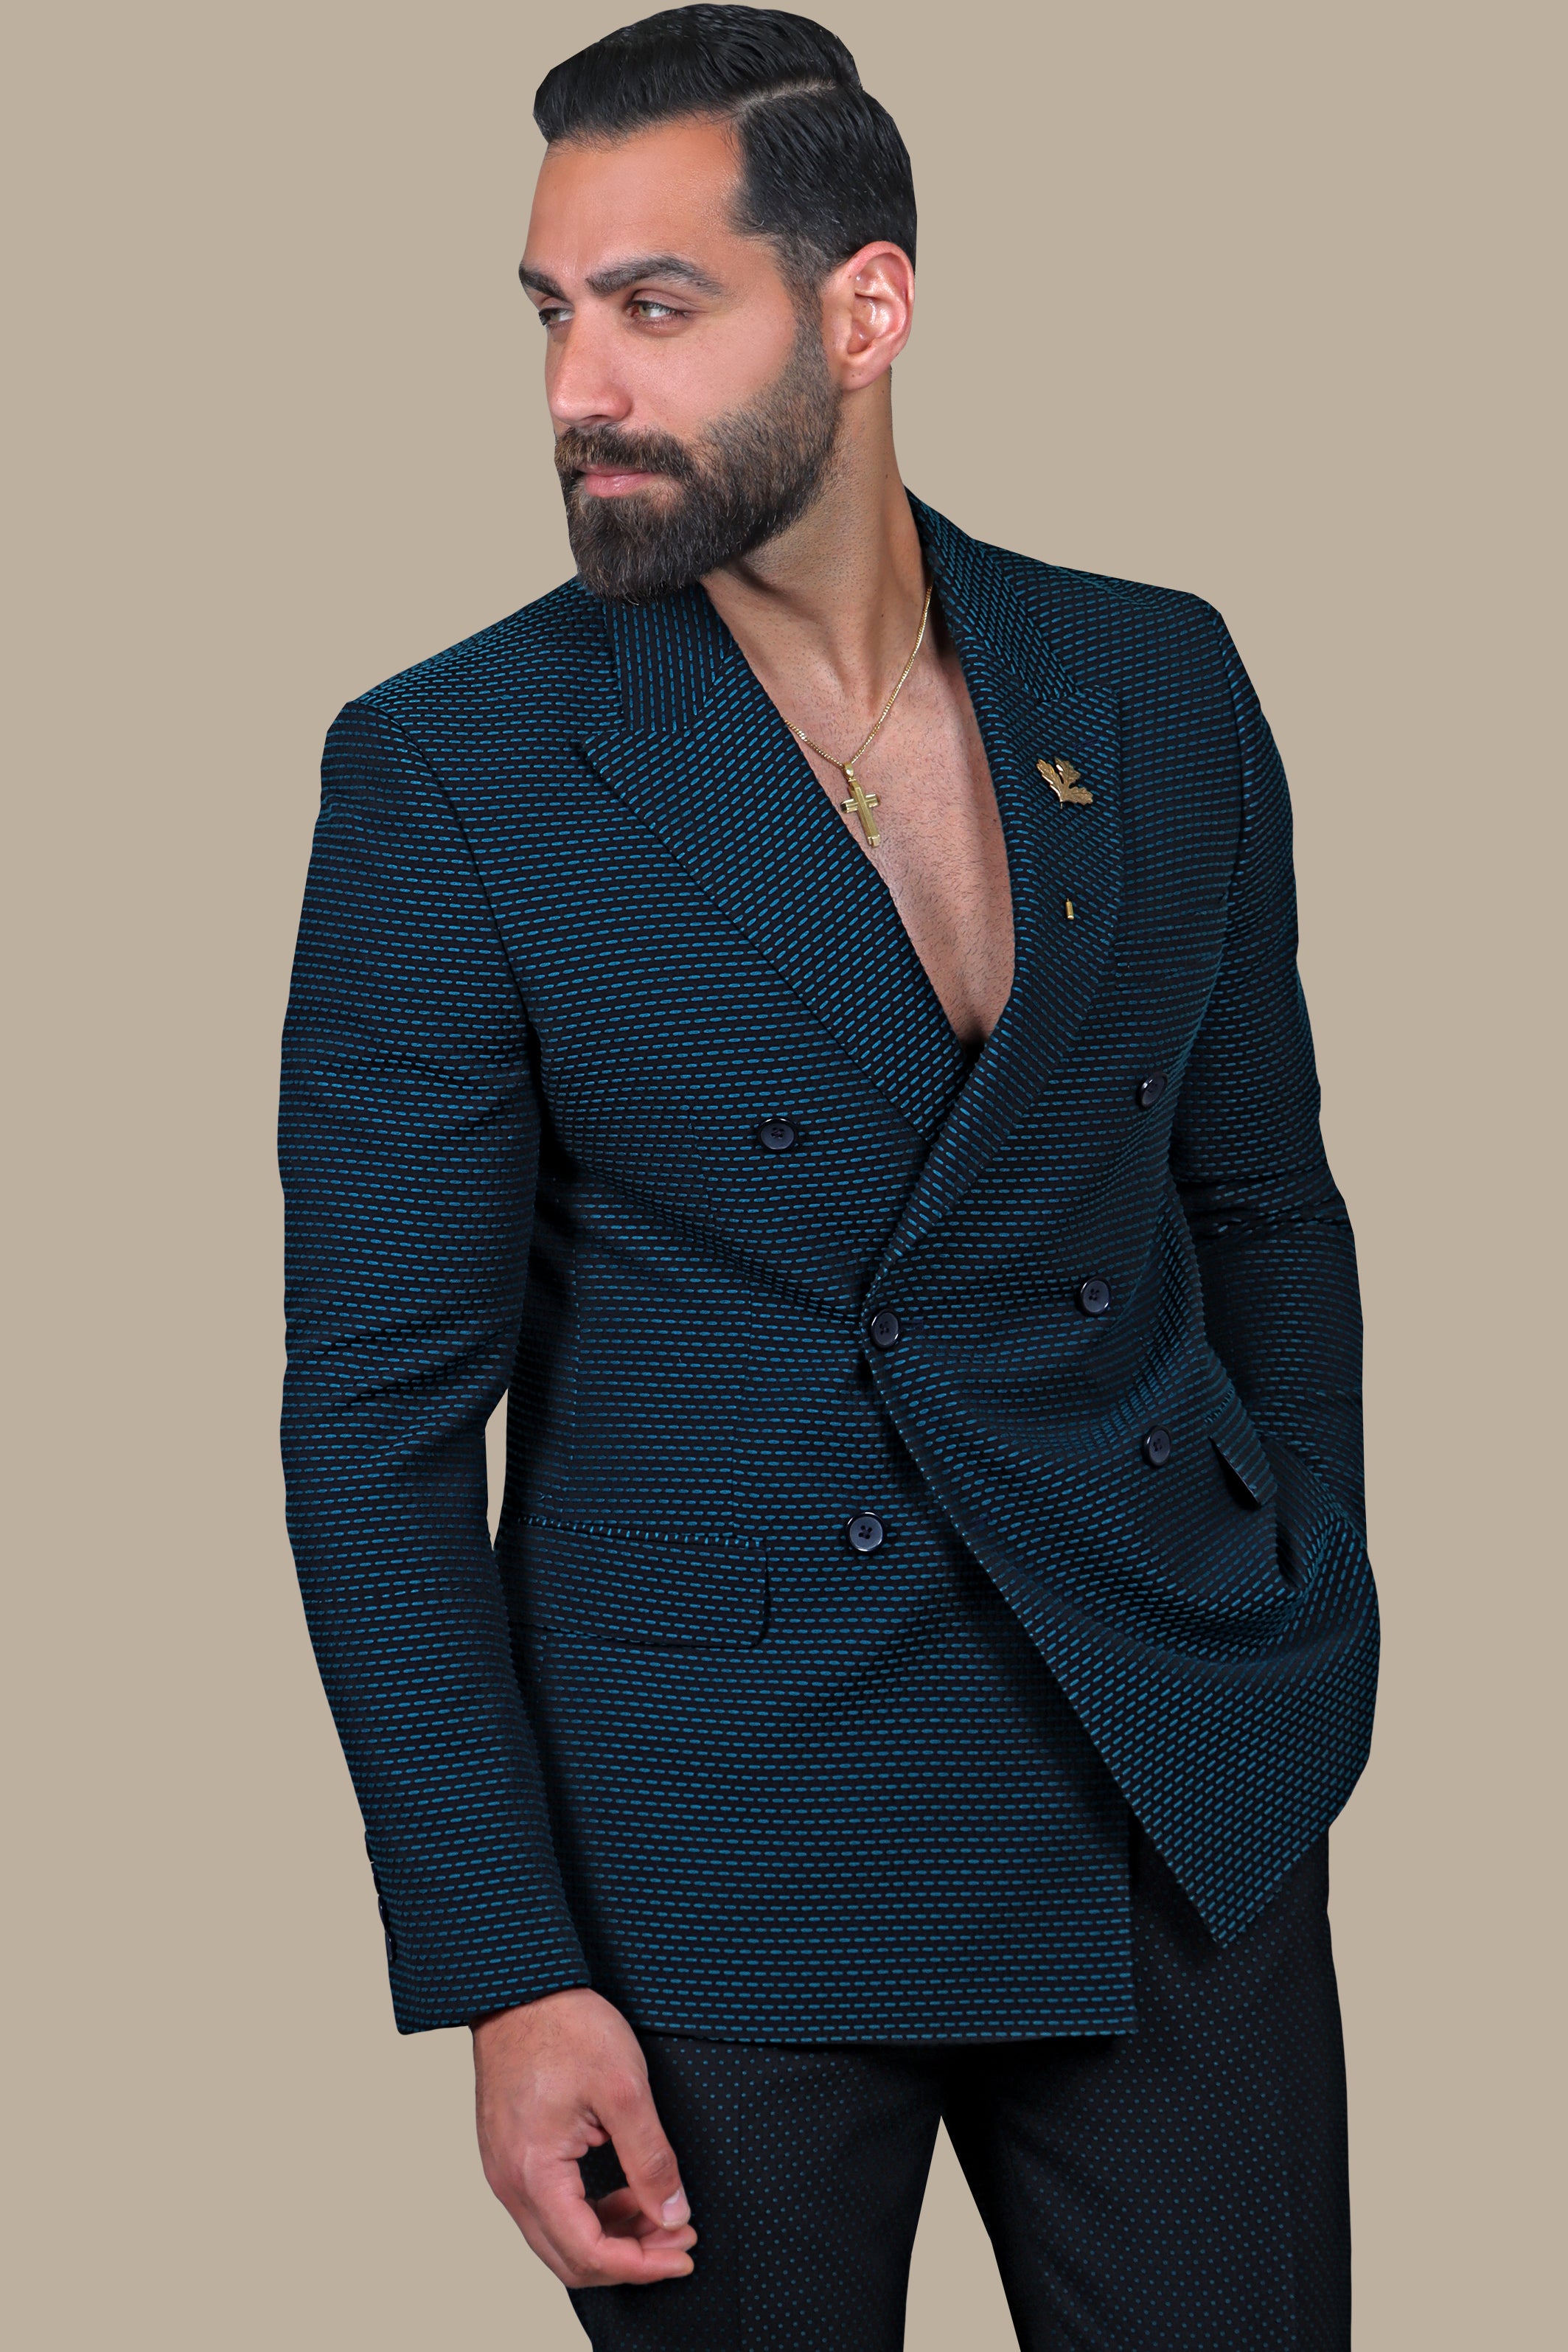 Petrol Perfect: The FV Blazer Stitched in Vibrant Hues